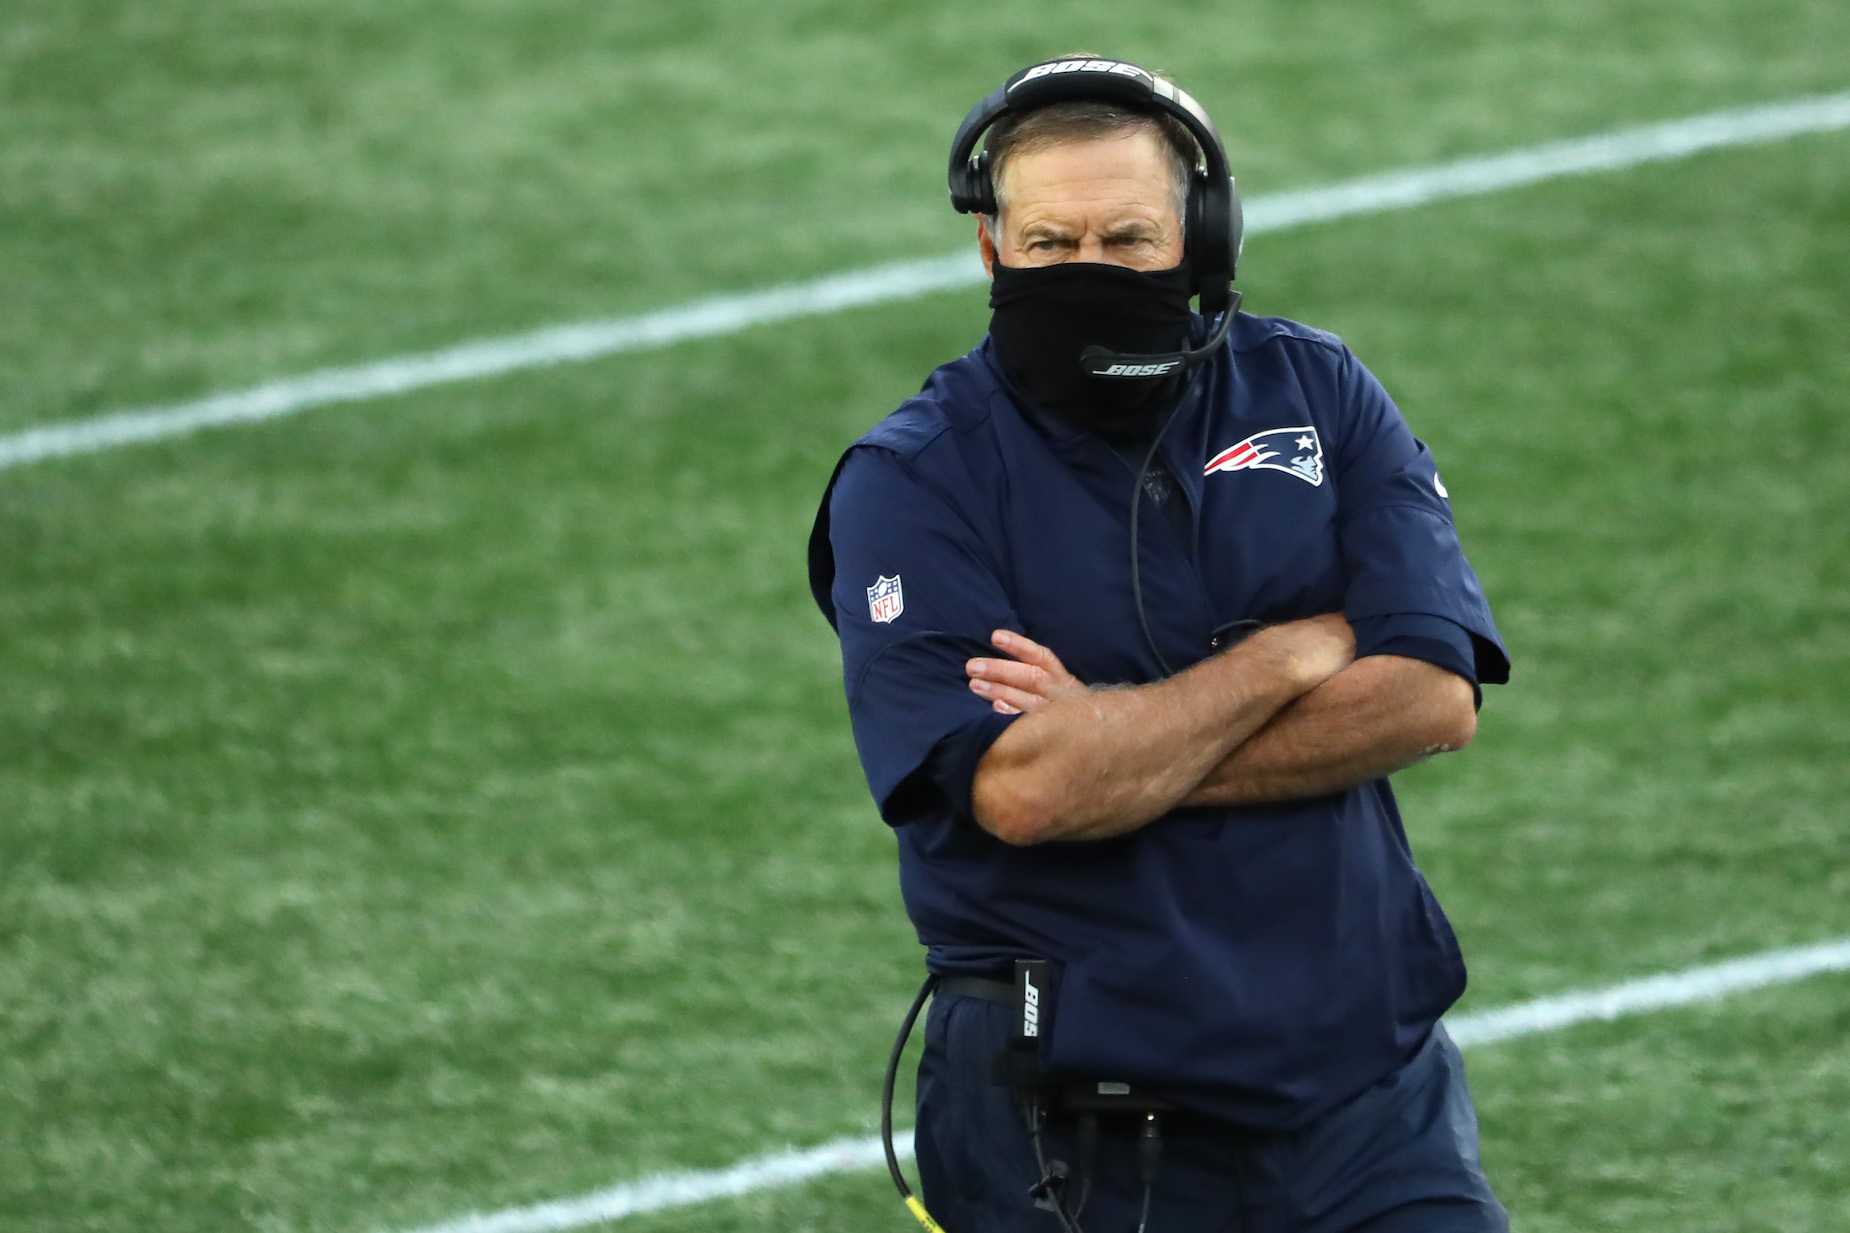 New England Patriots coach Bill Belichick isn't benching Cam Newton, which tells you everything you need to know.